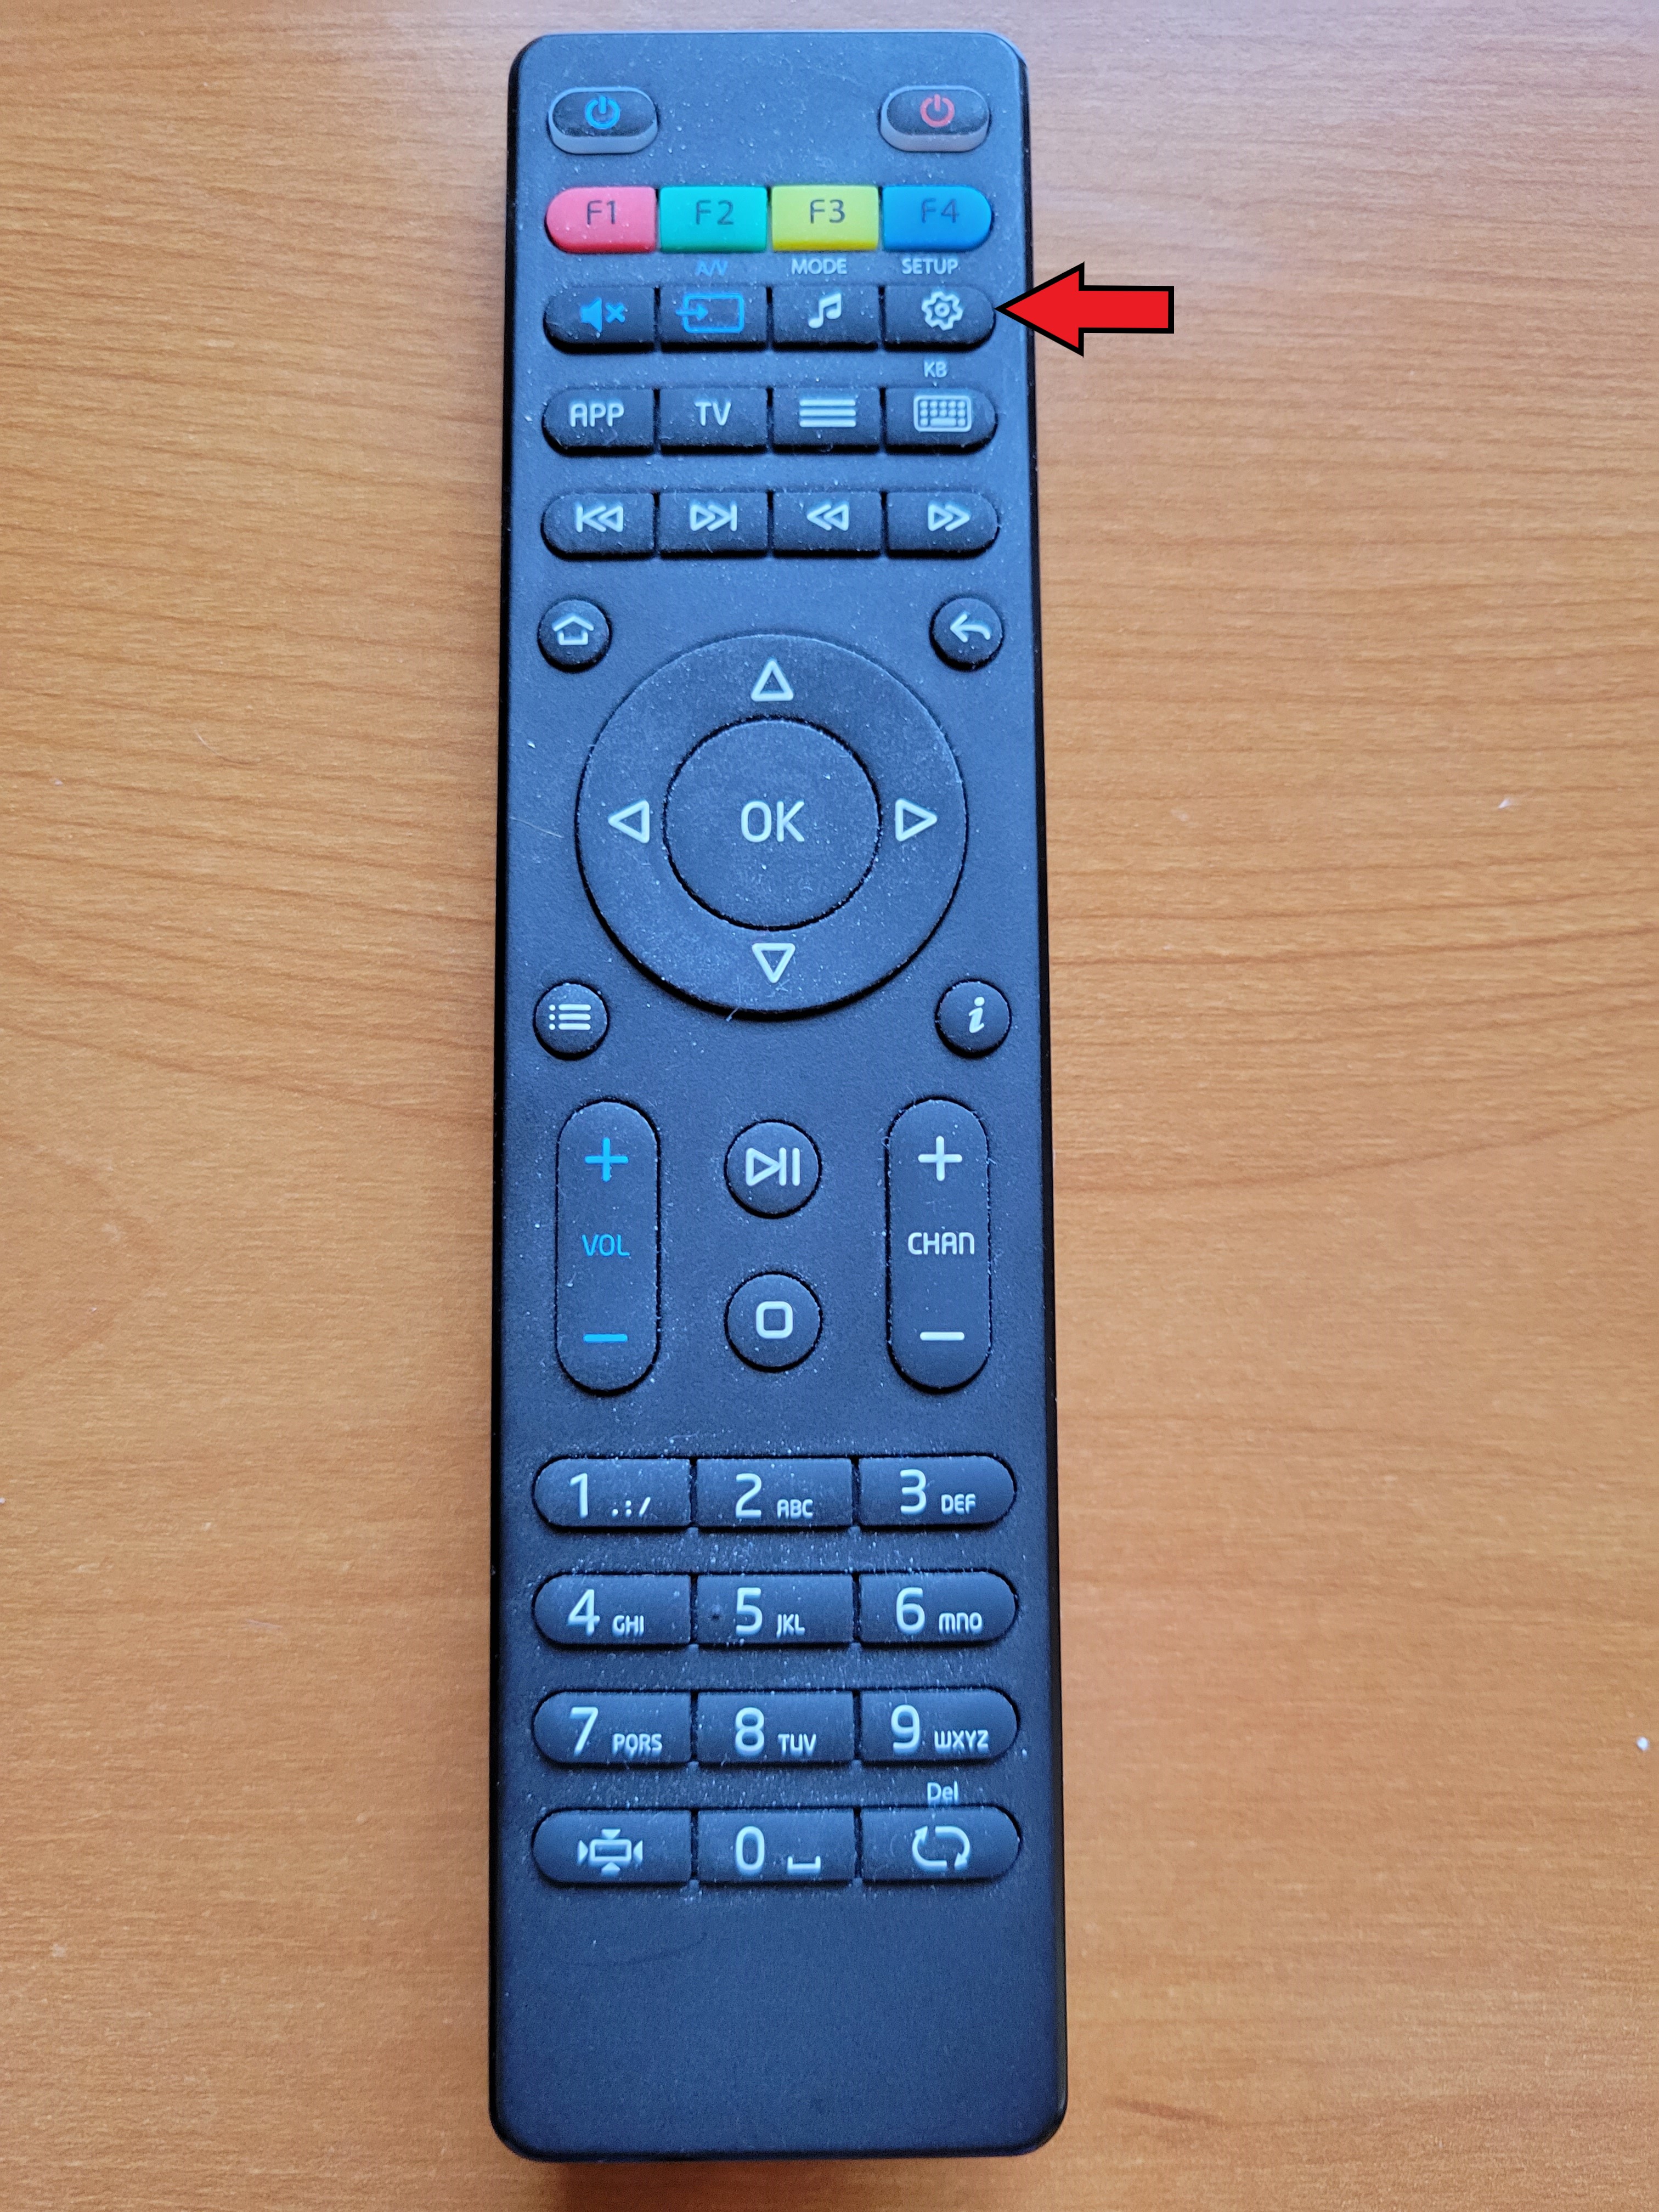 Settings button on the remote control